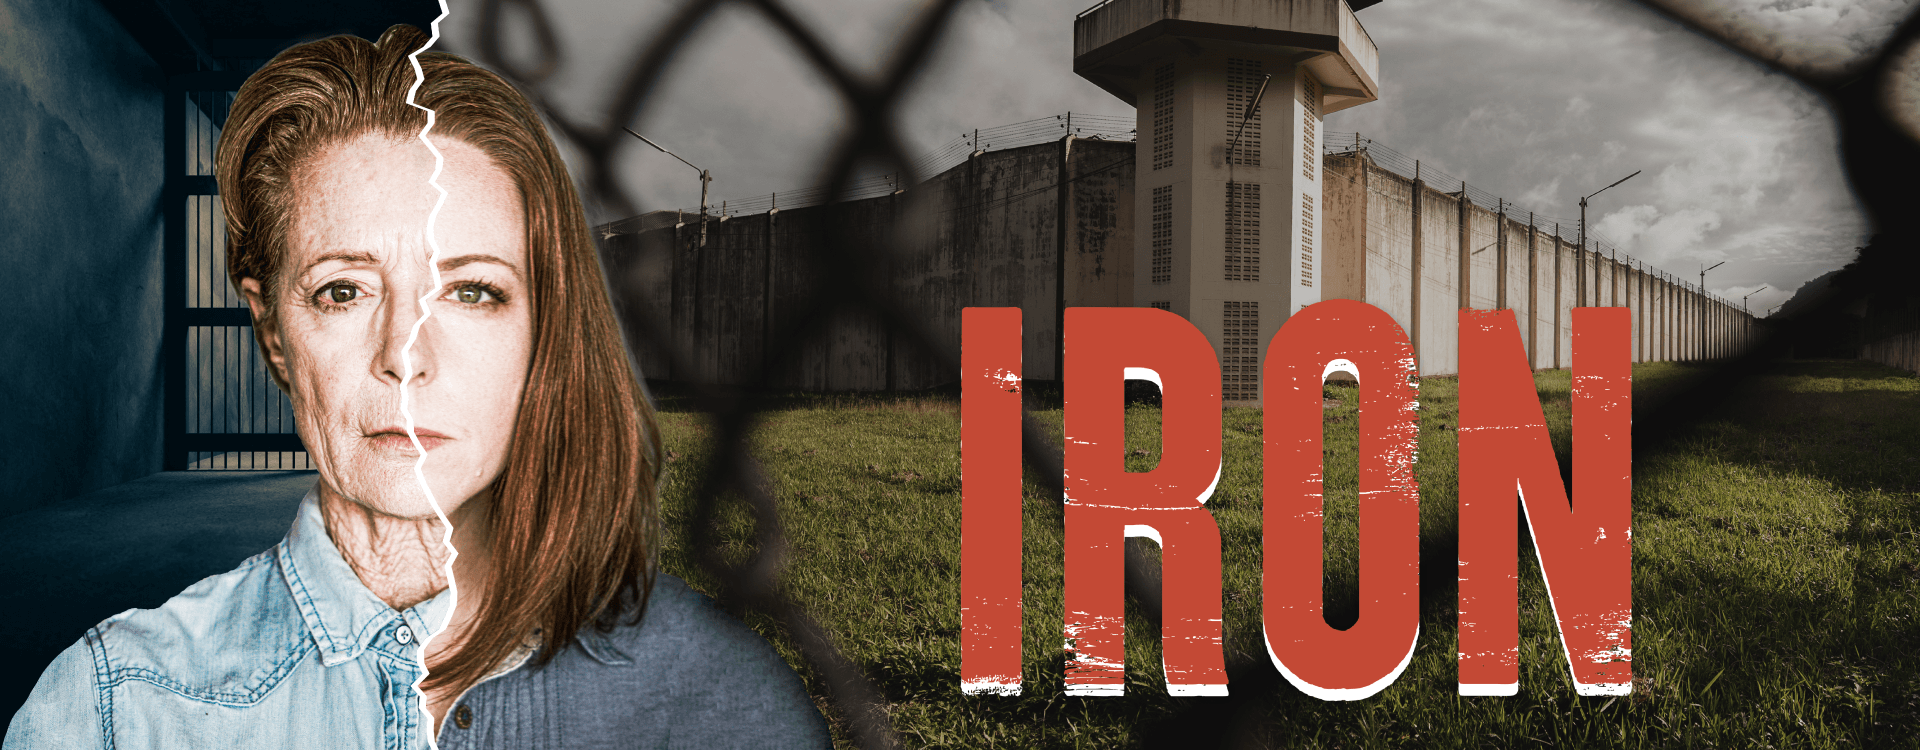 Iron title treatment with women standing in a prison yard